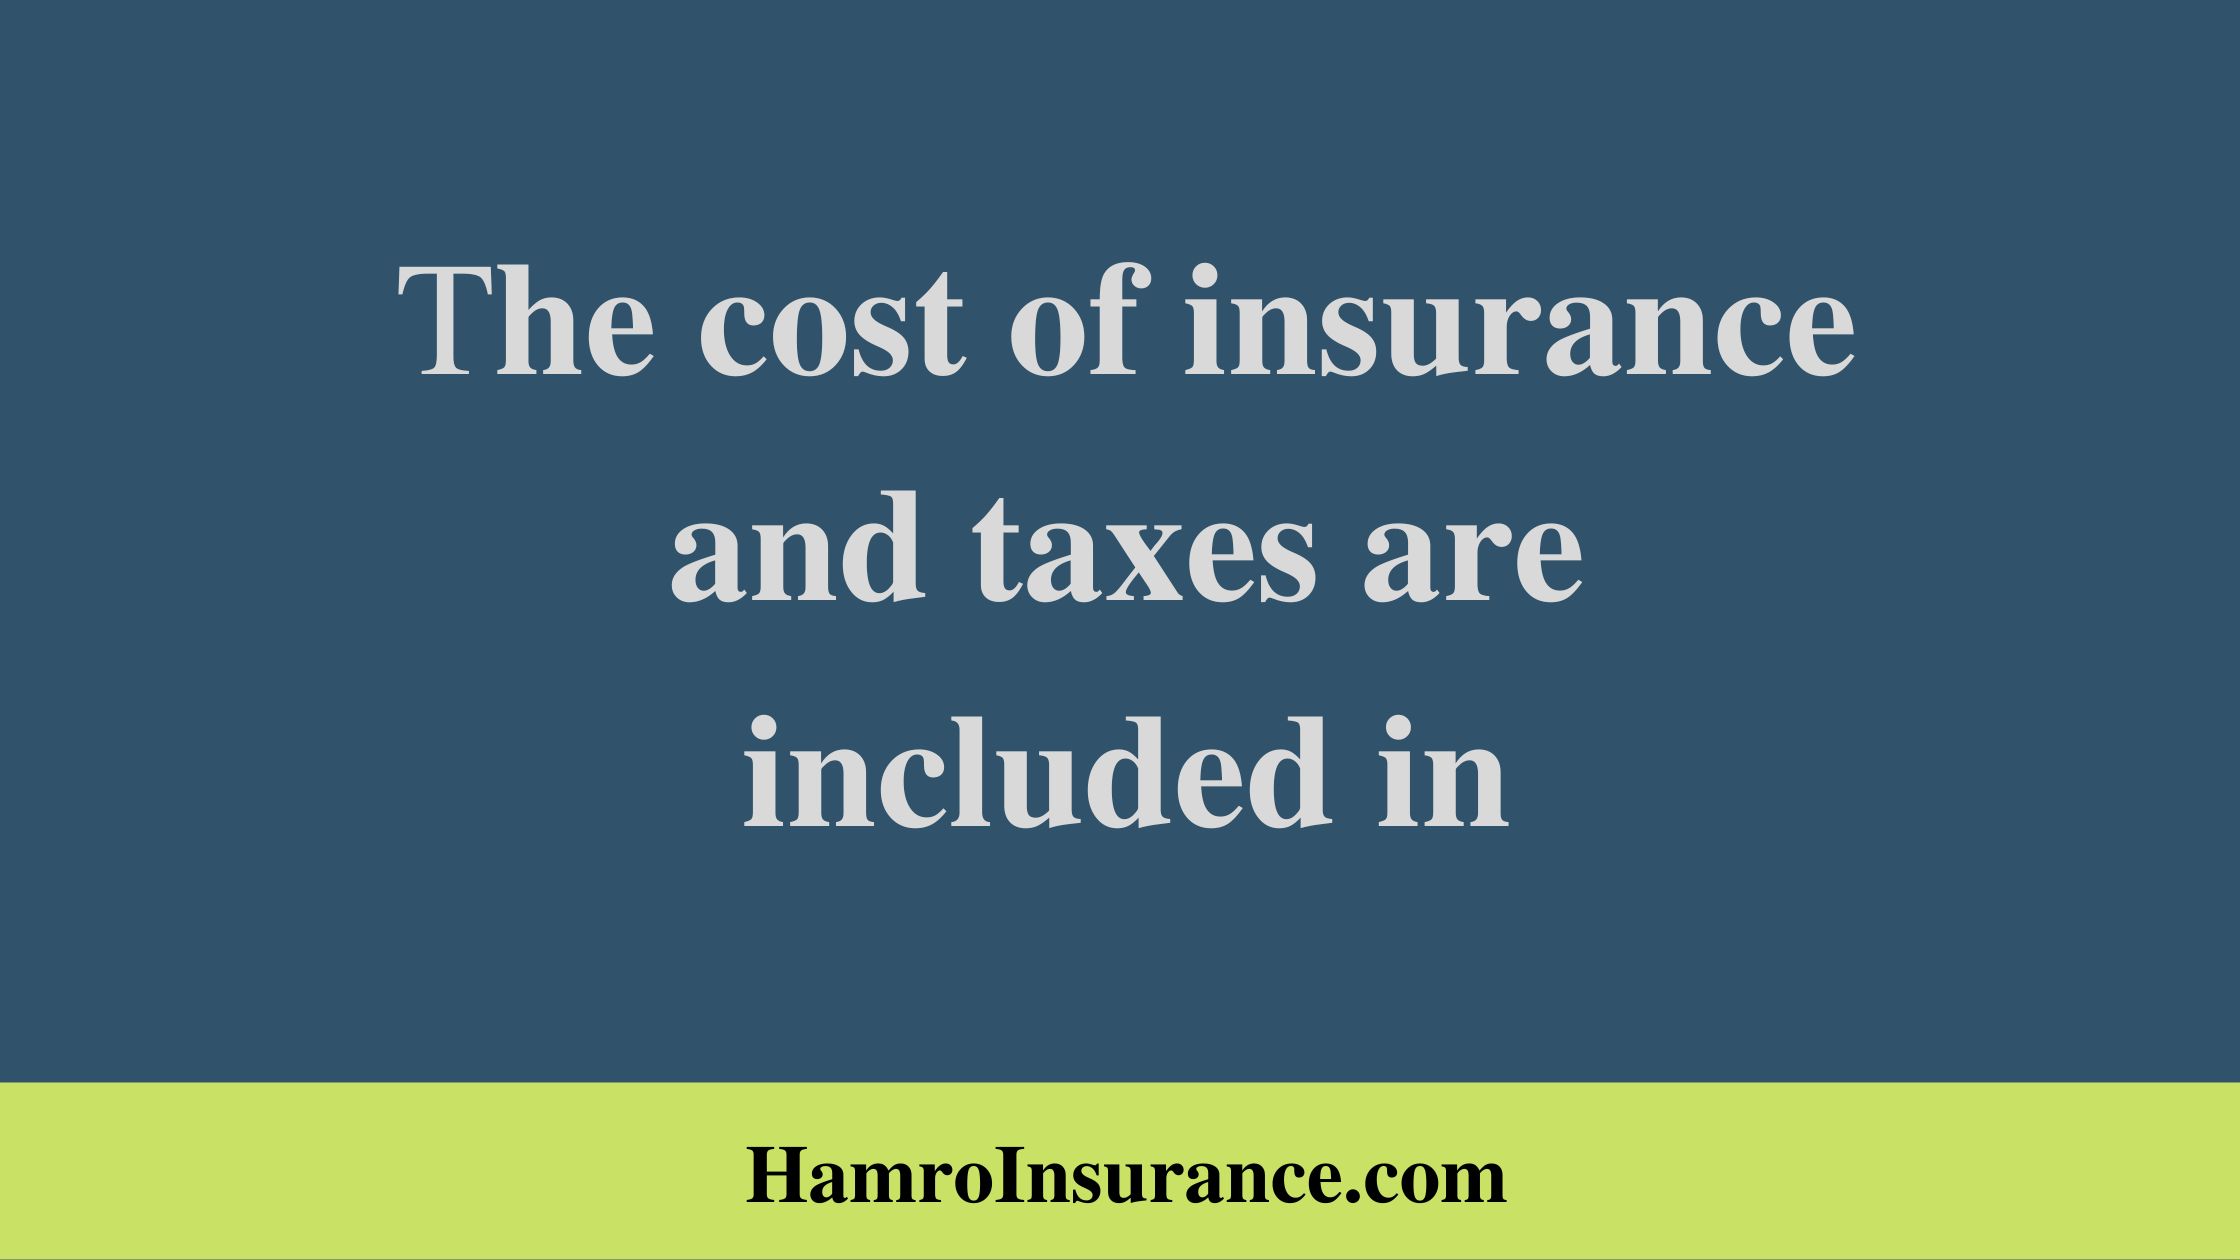 The cost of insurance and taxes are included in